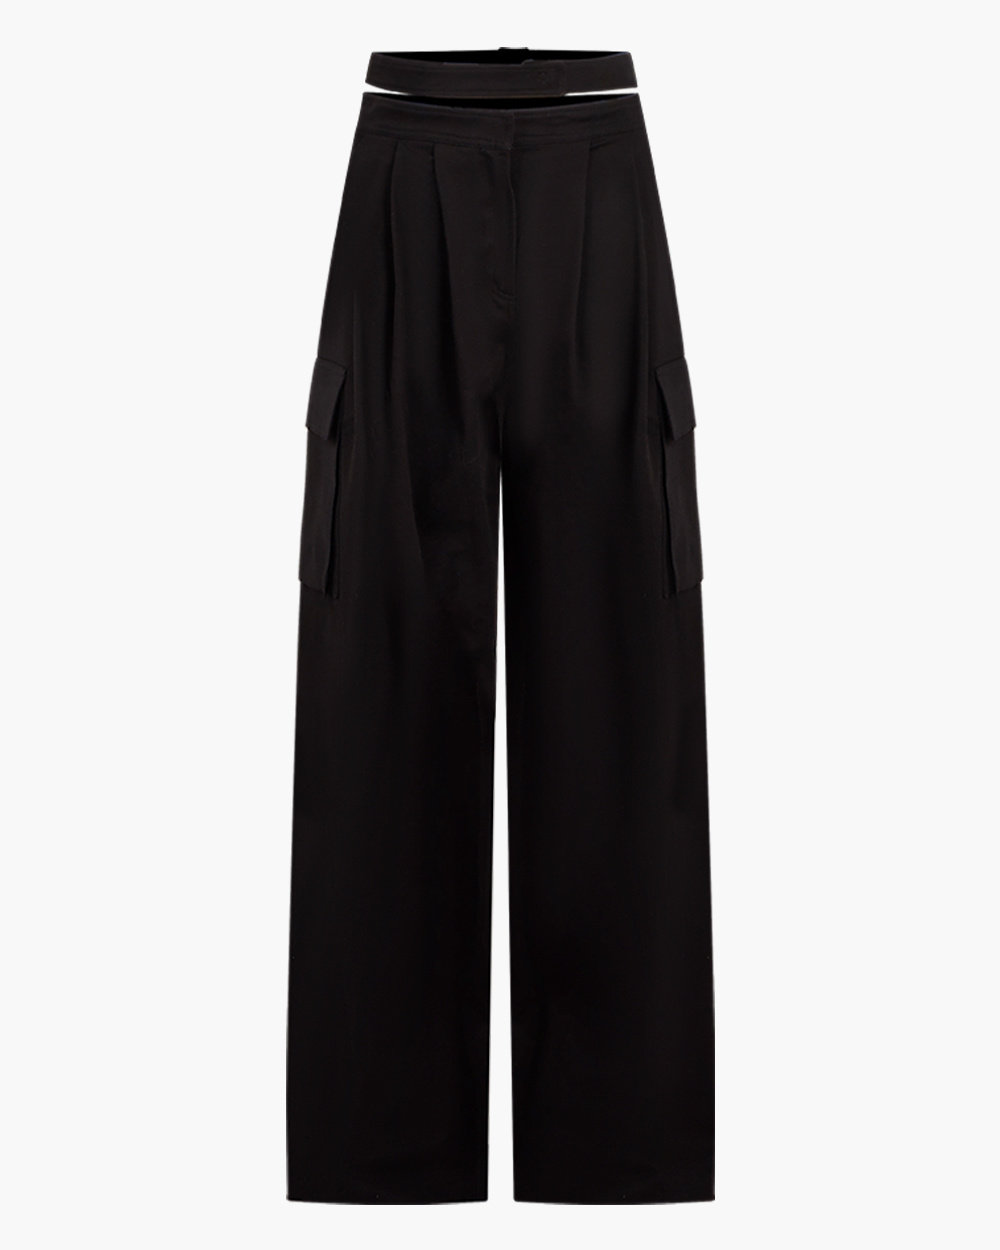 TROUSERS WITH DOUBLE BELT BLACK